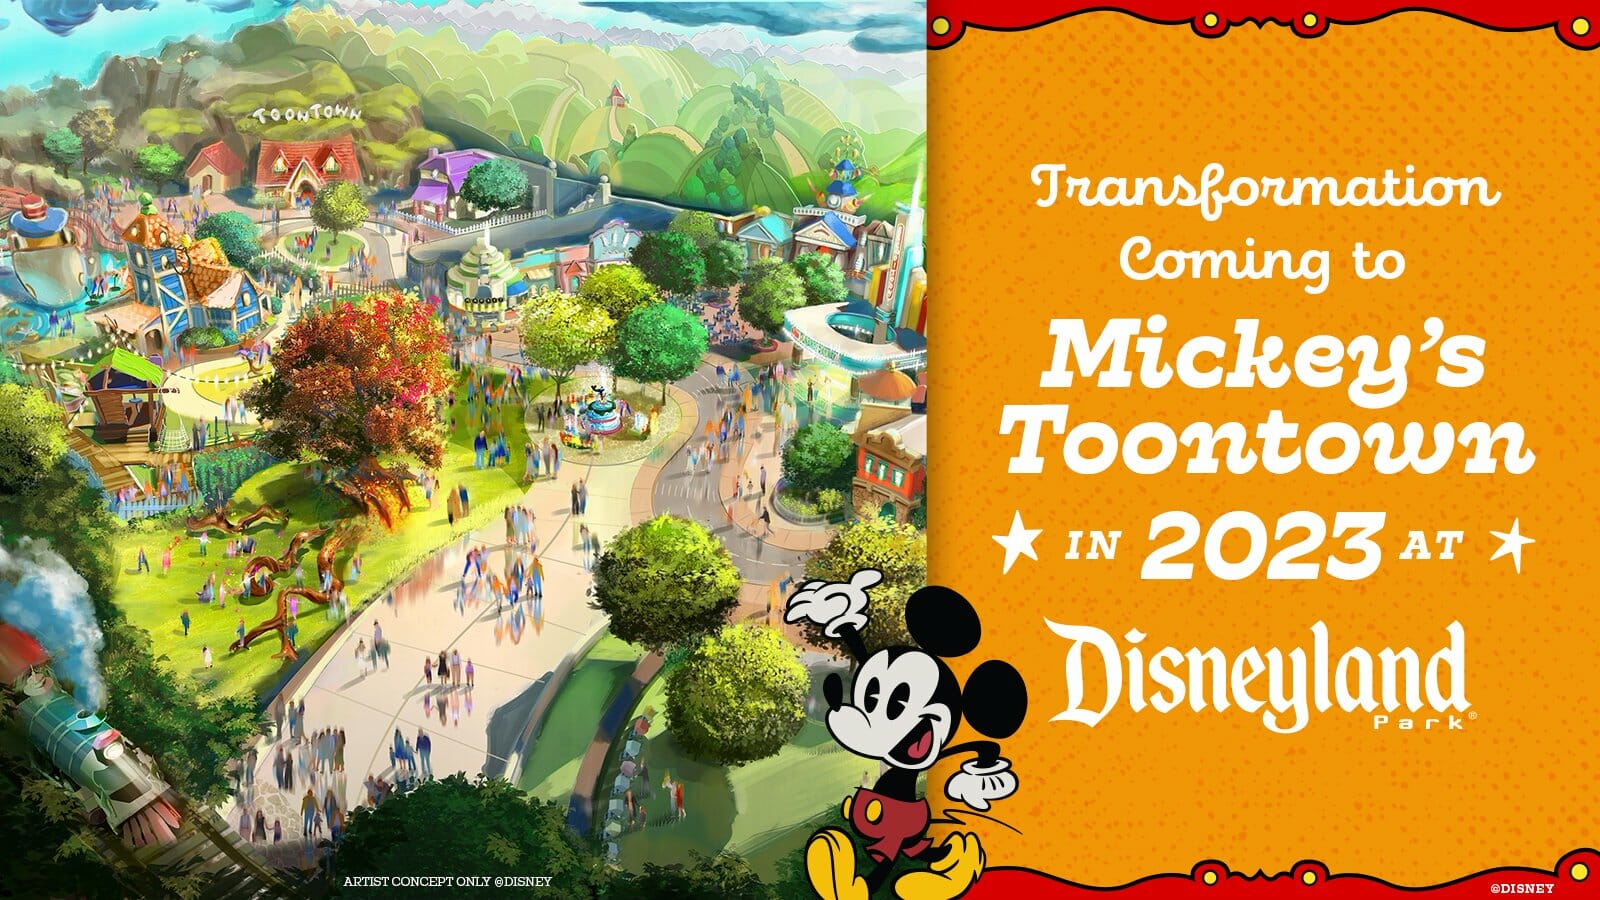 Toontown Transformation Reimagined